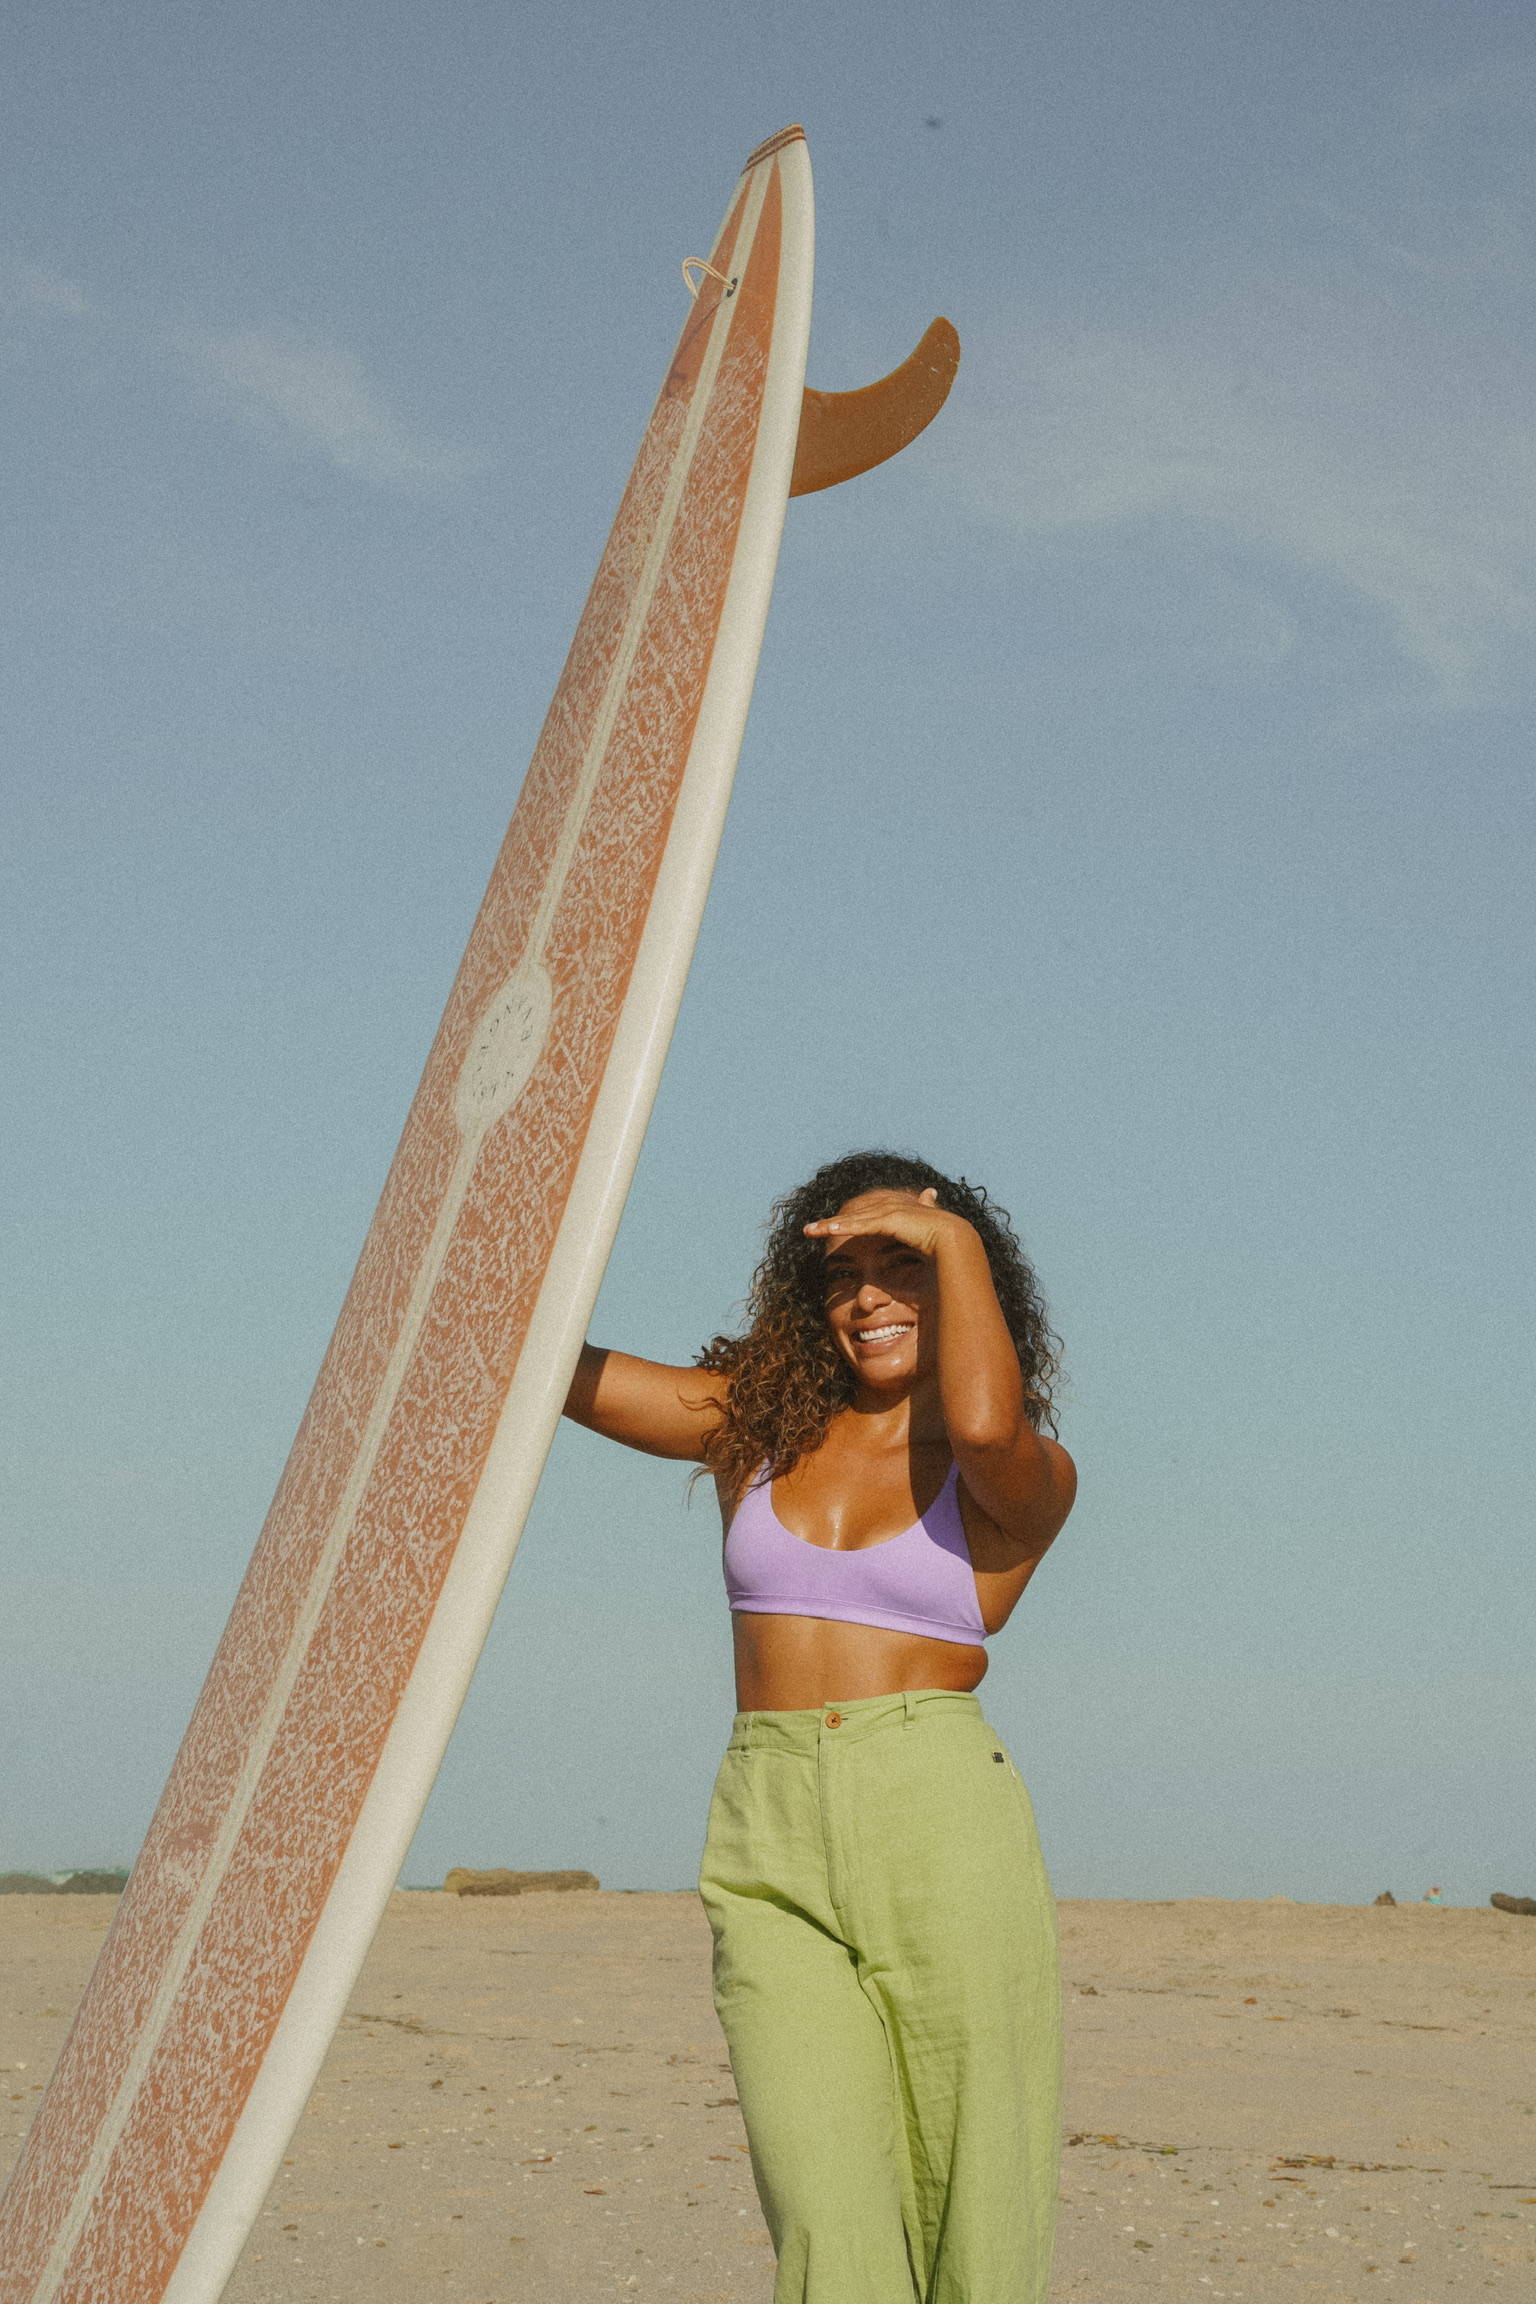 A woman in a lavender bikini top and green pants holding a longboard surfboard on the beach.